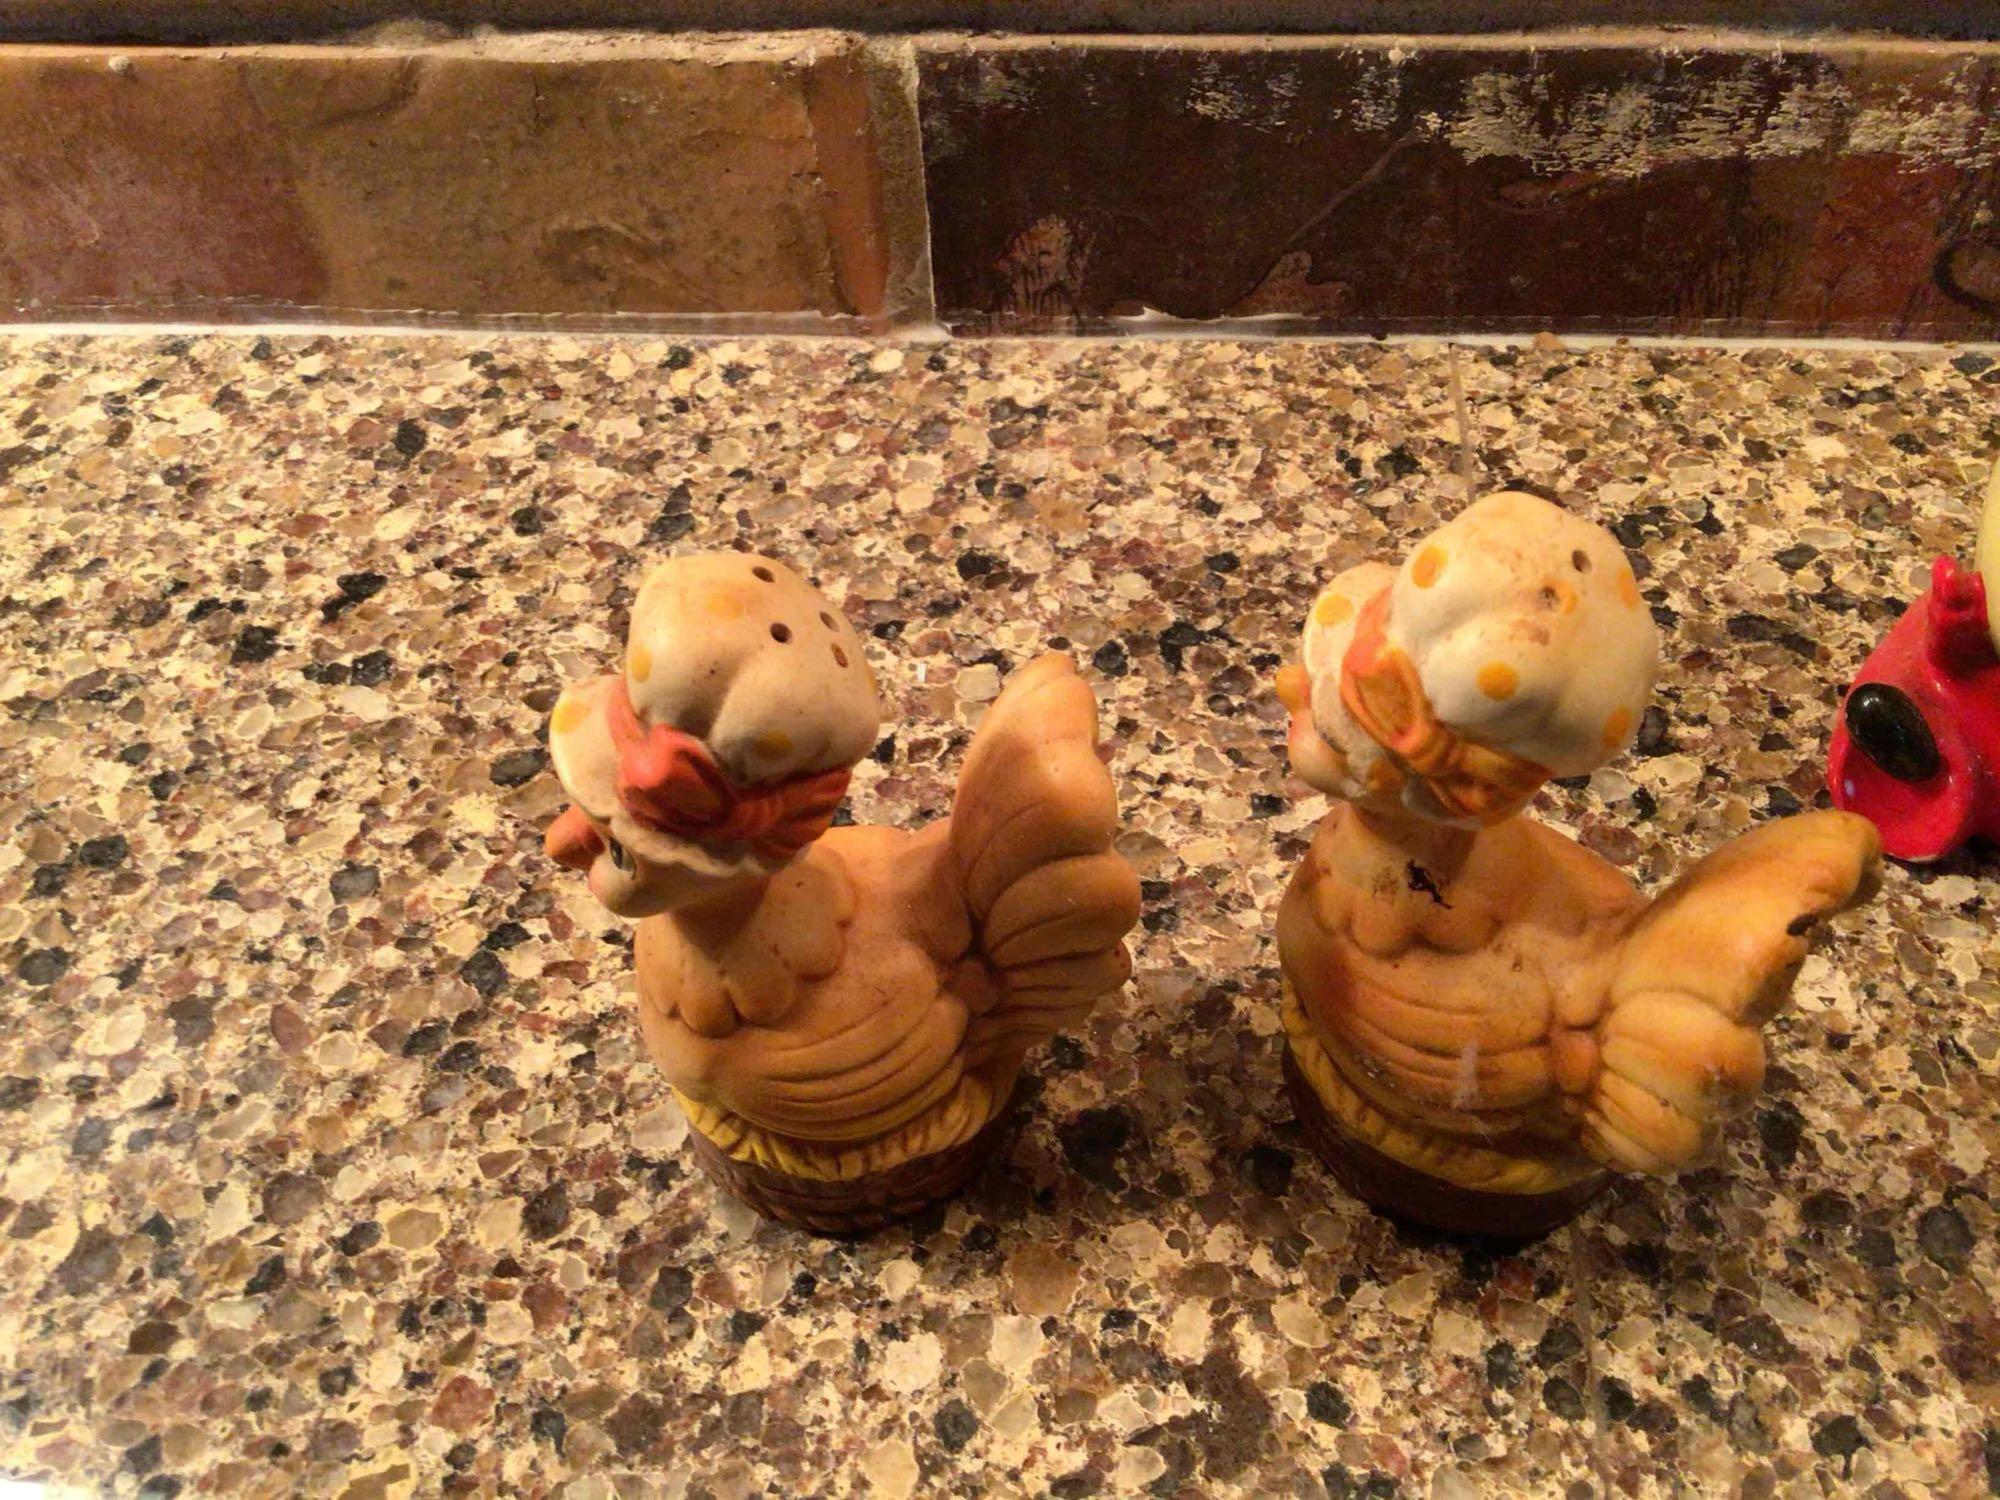 salt and pepper shakers